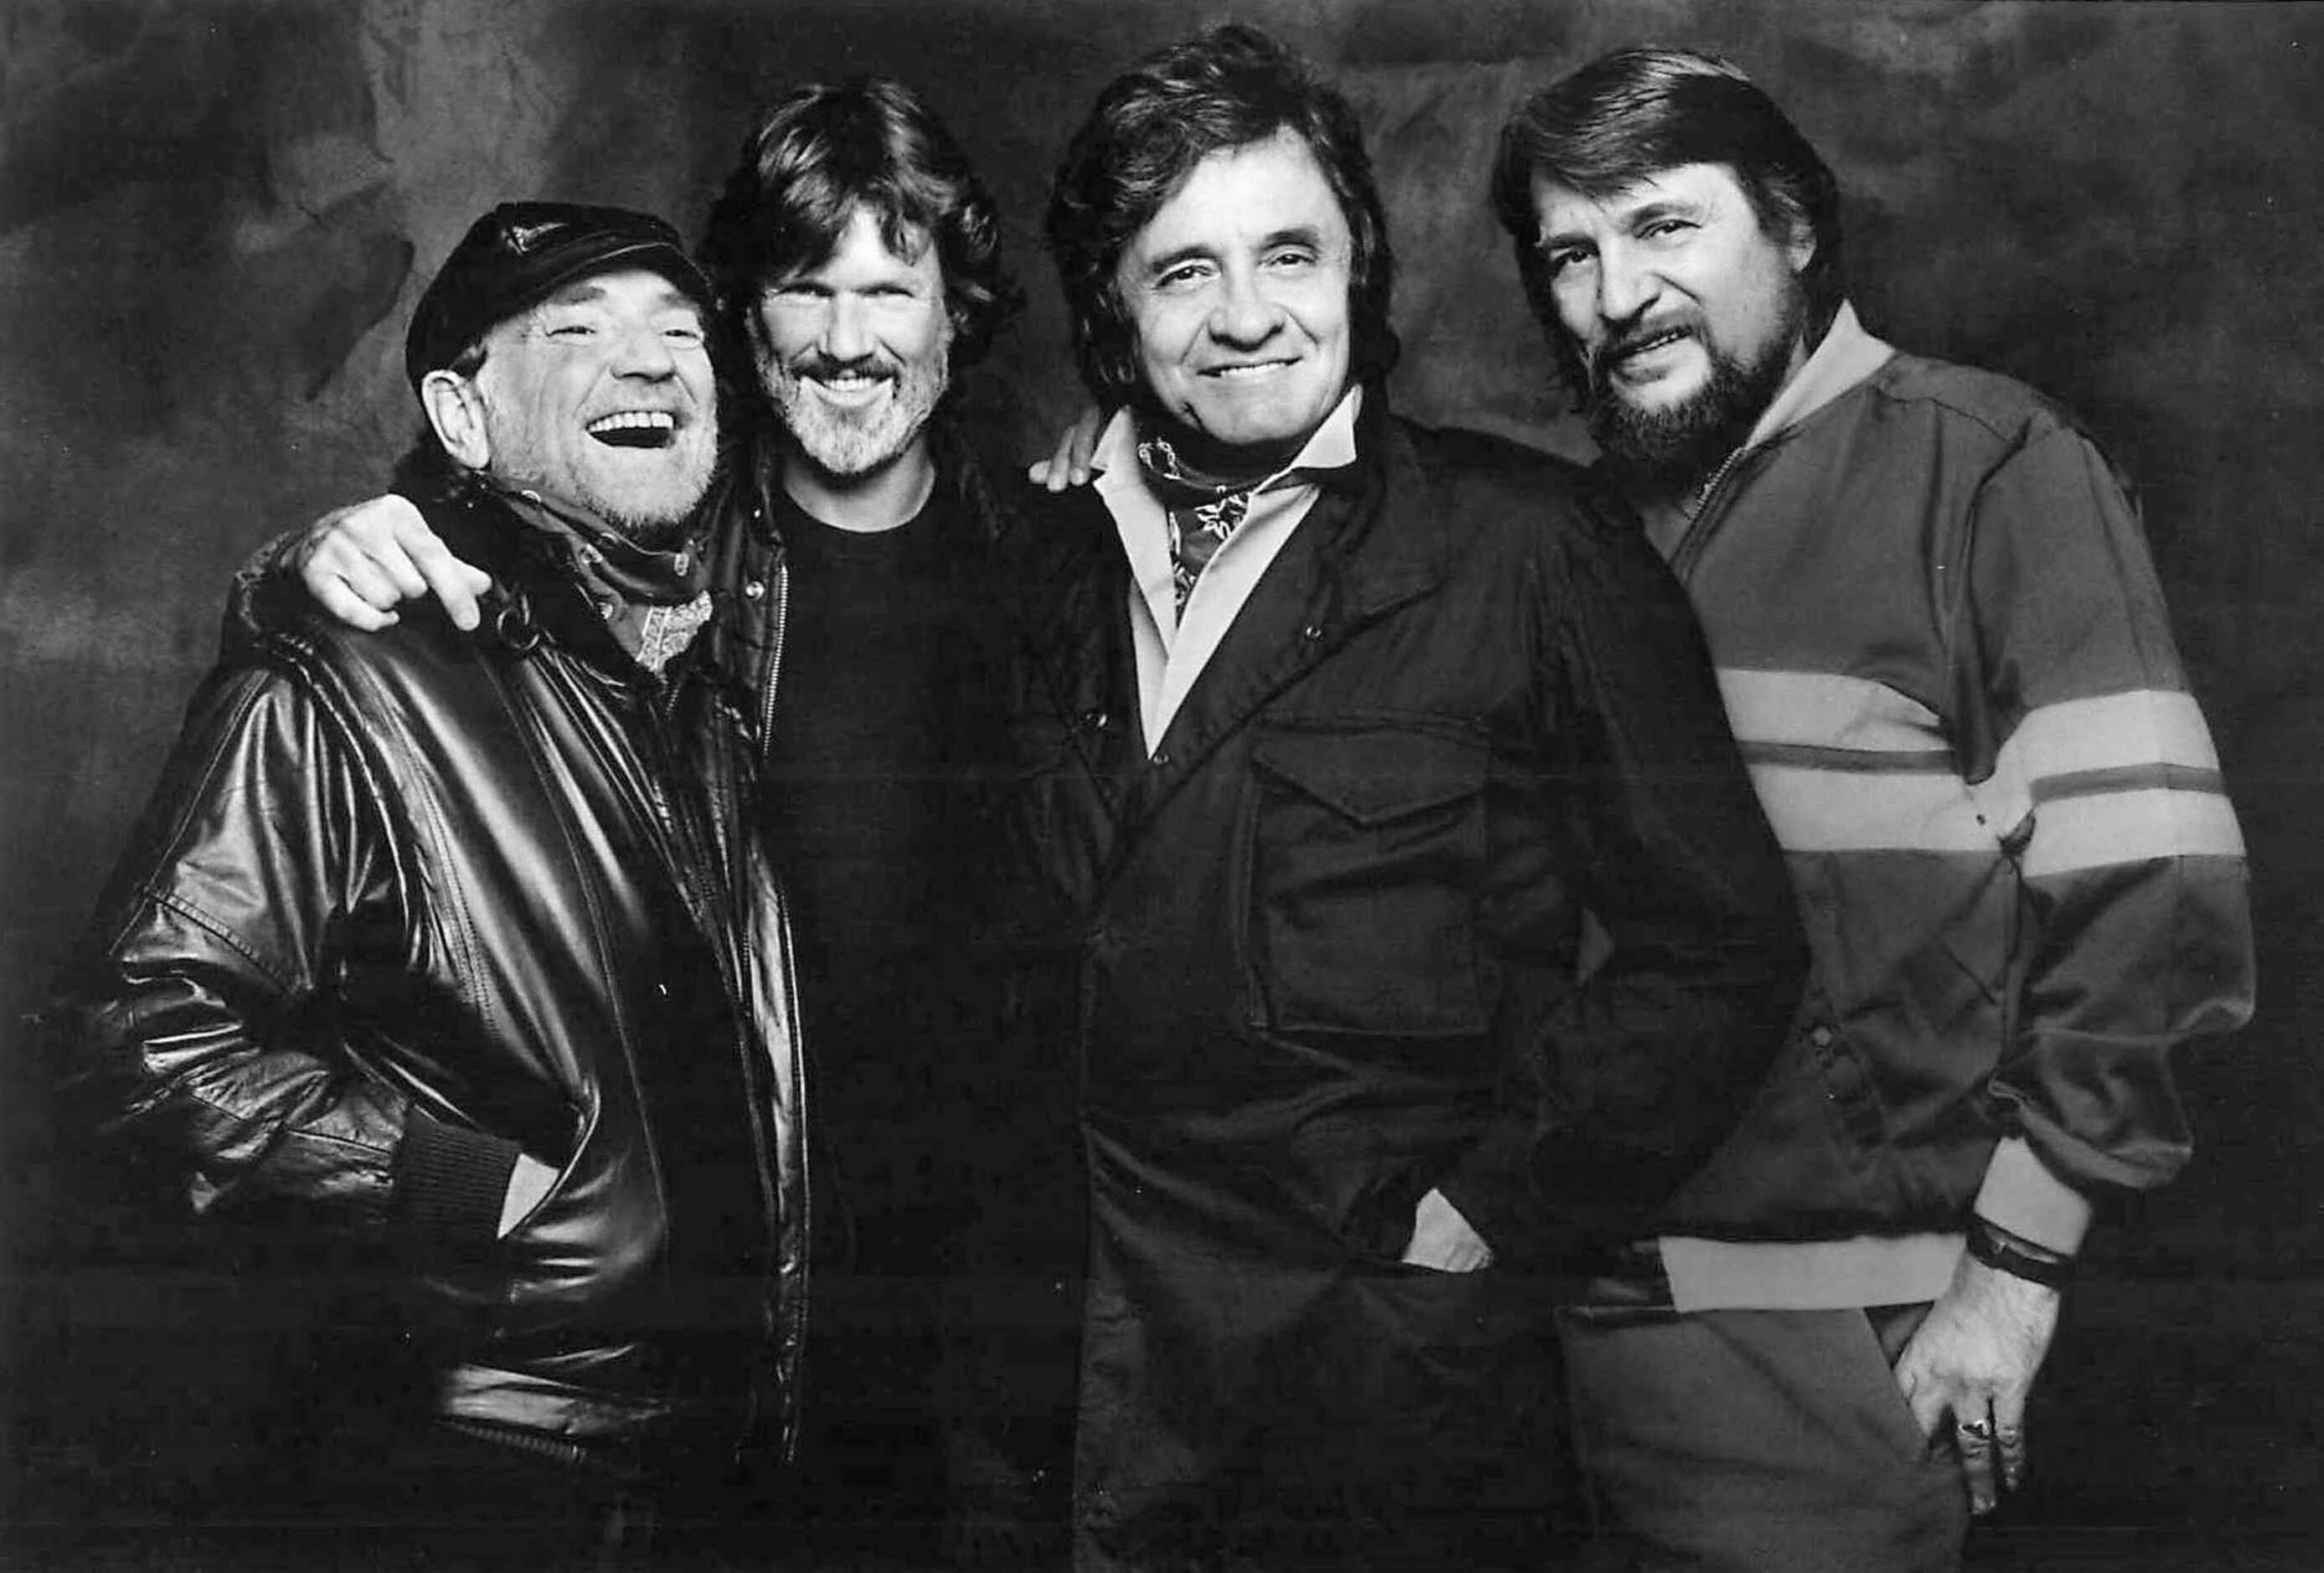 1985 - A promotional photo for the first album of country supergroup (and outlaw artists)...